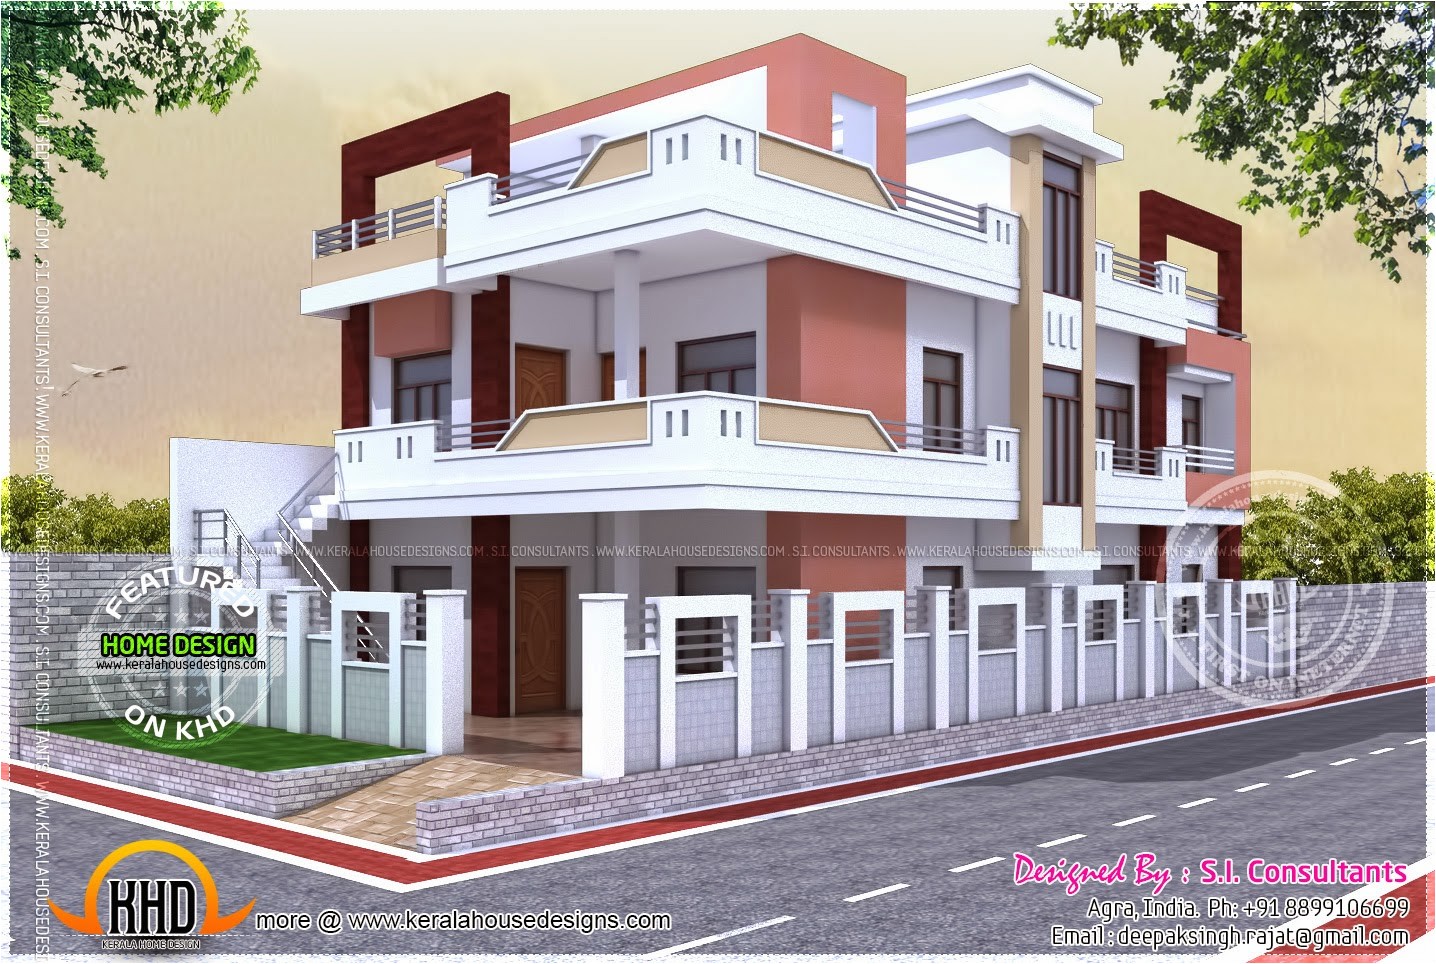 House Plan for Indian Homes Floor Plan Of north Indian House Kerala Home Design and